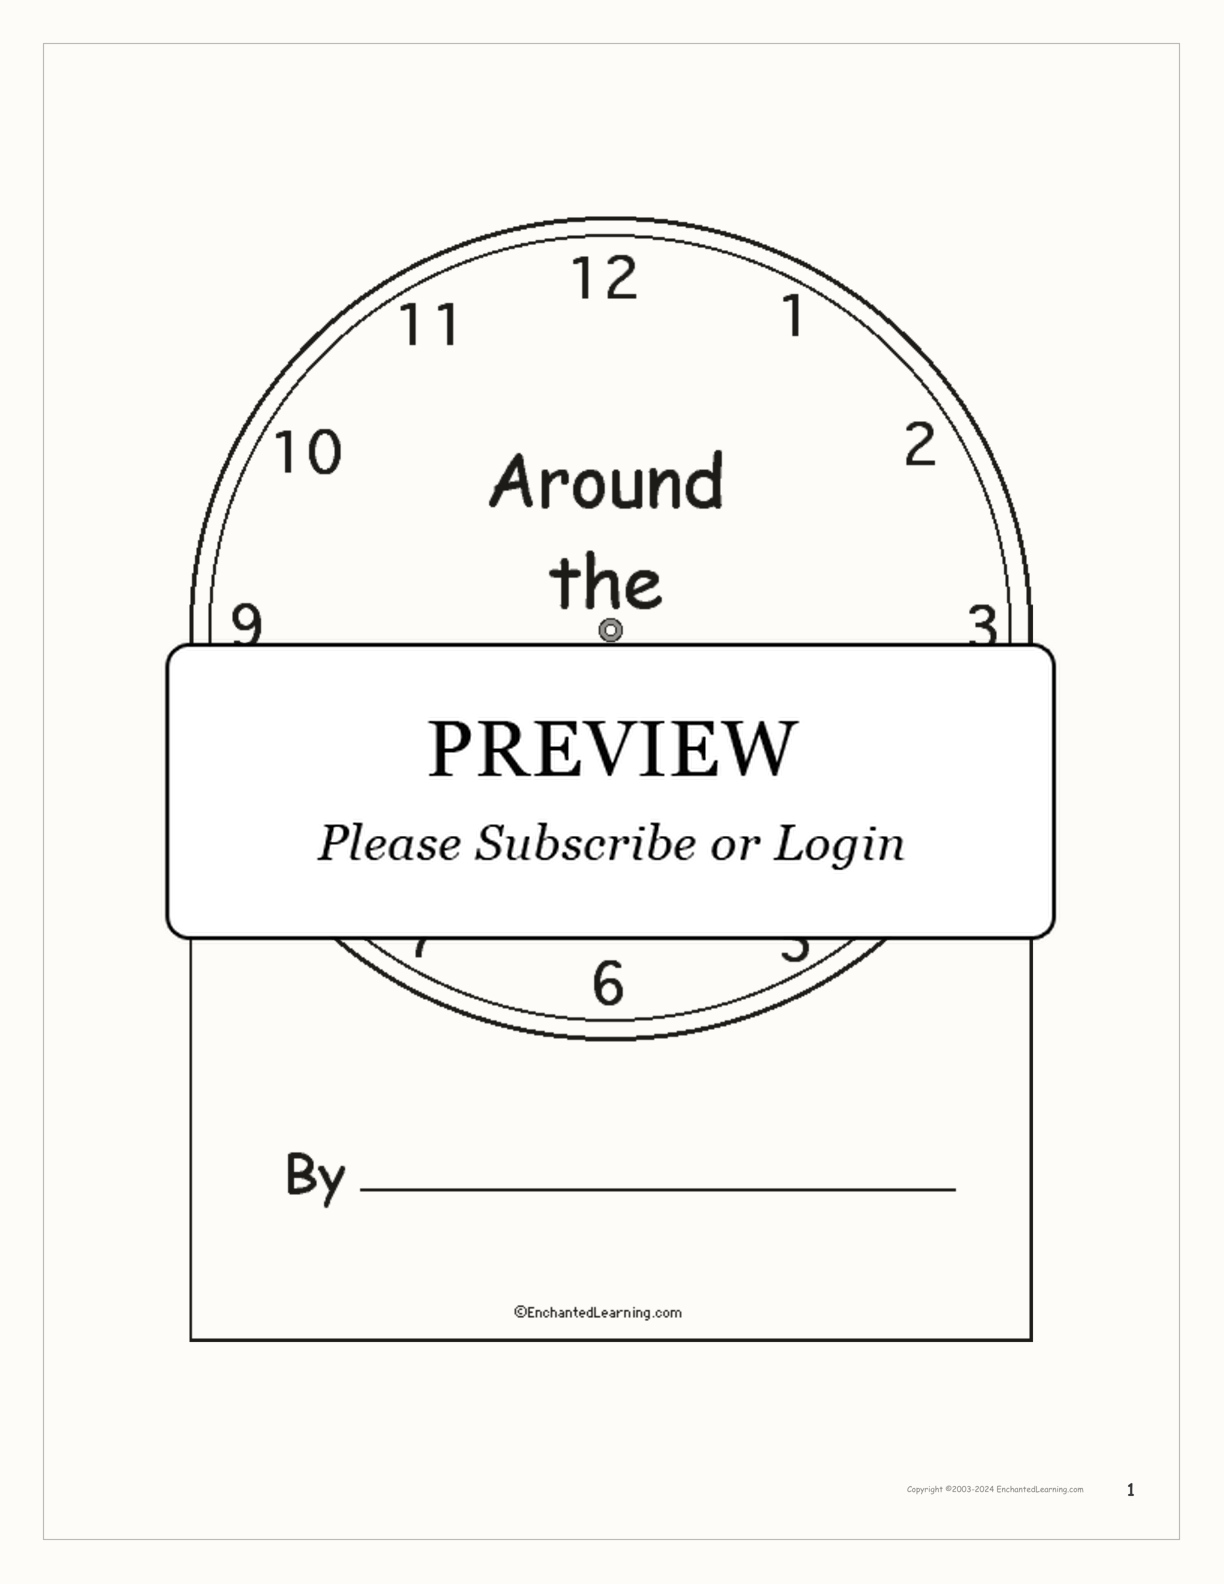 'Around the Clock' Book interactive printout page 1